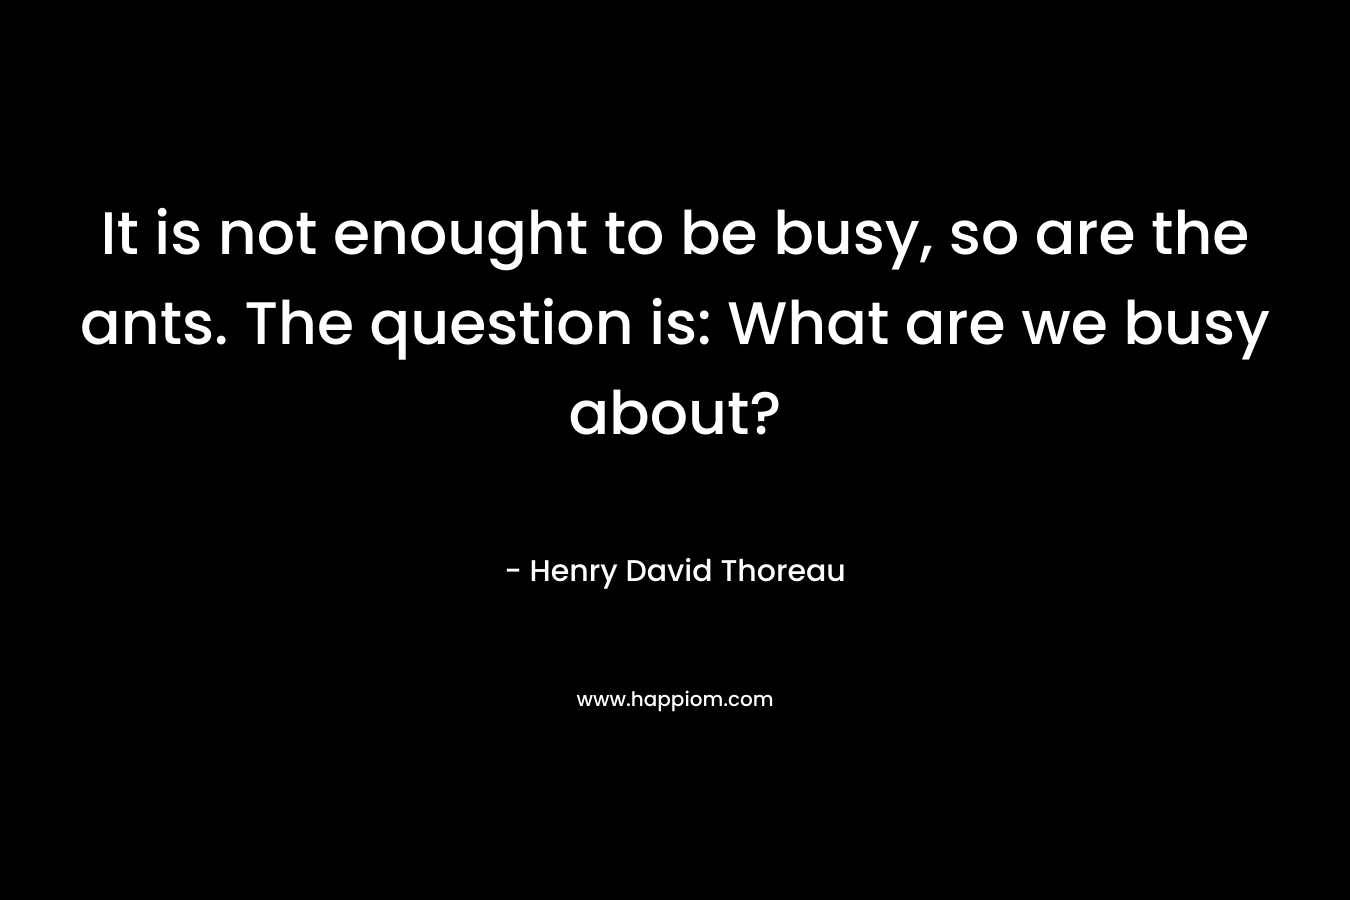 It is not enought to be busy, so are the ants. The question is: What are we busy about?